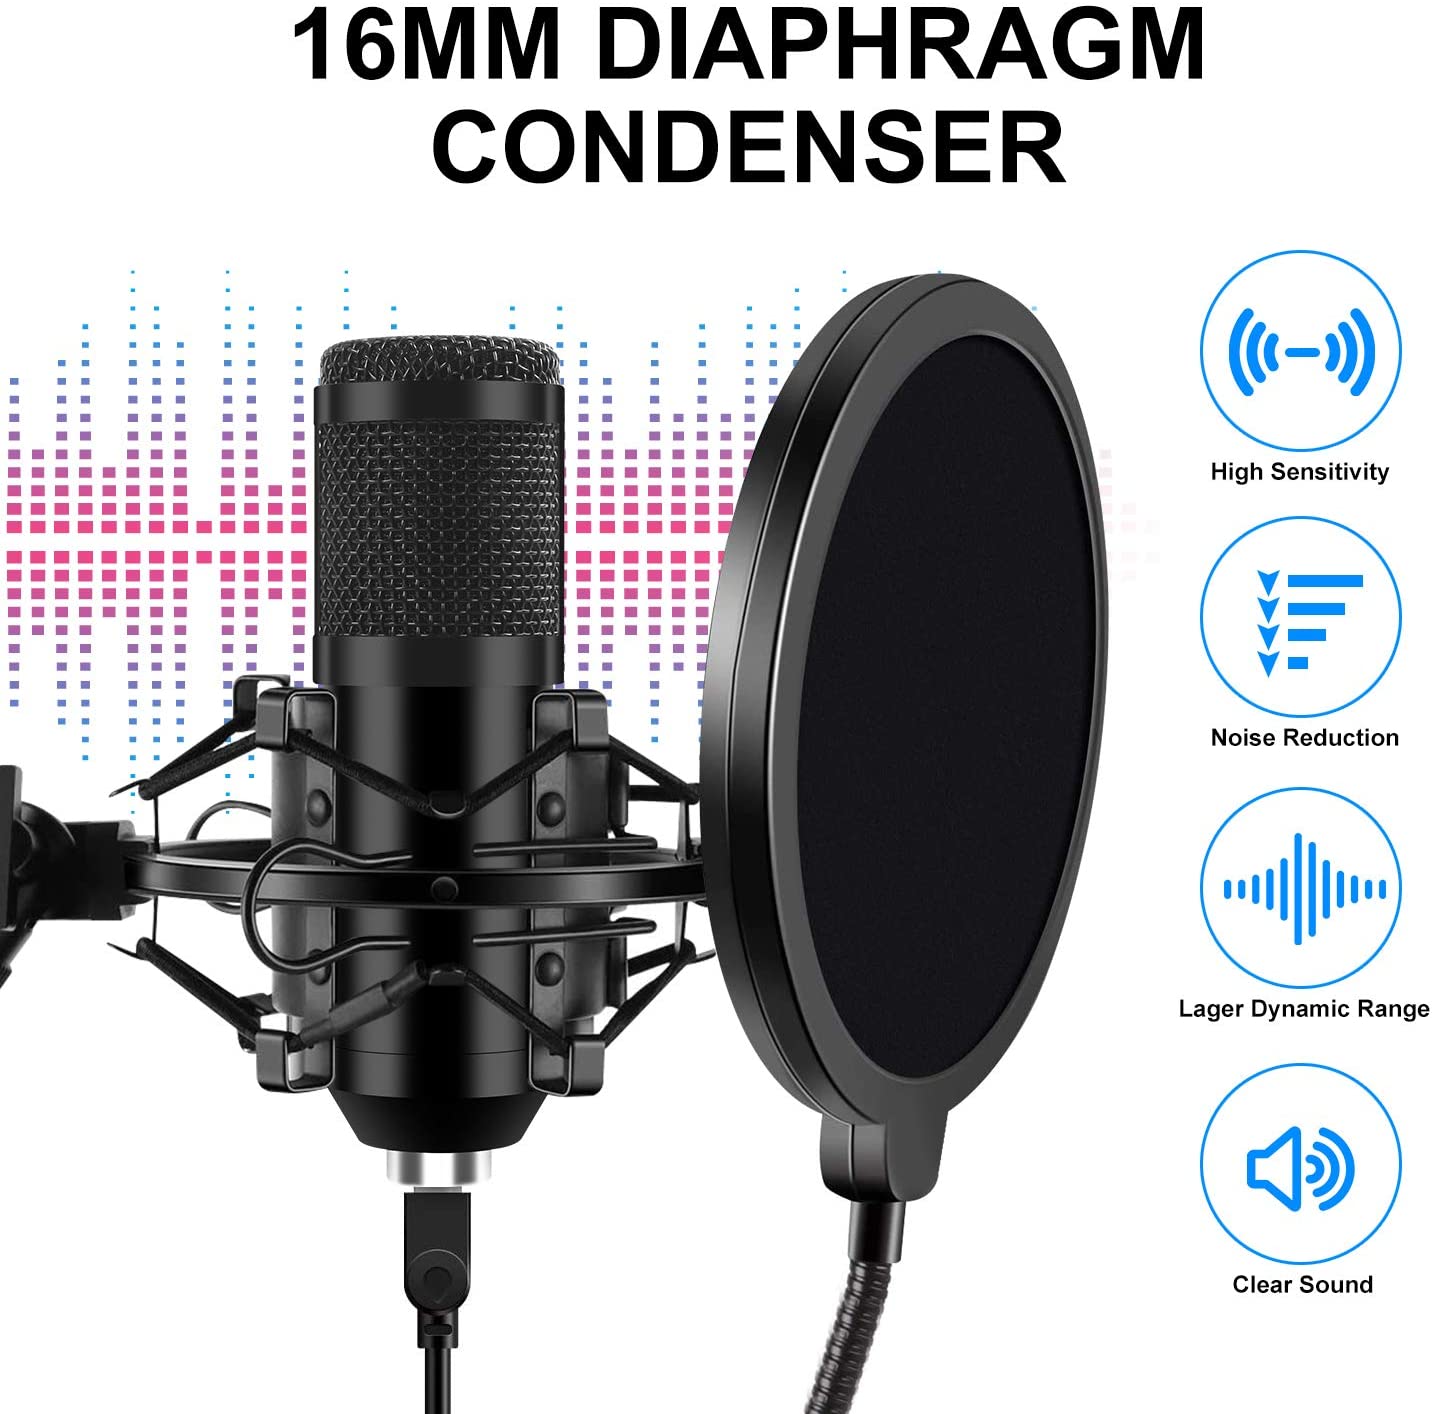 USB Condenser Microphone for Computer PC 192KHZ/24BIT Professional Cardioid Microphone Kit with Adjustable Scissor Arm Stand Shock Mount Pop Filter for Karaoke, YouTube, Gaming Recording - image 2 of 8